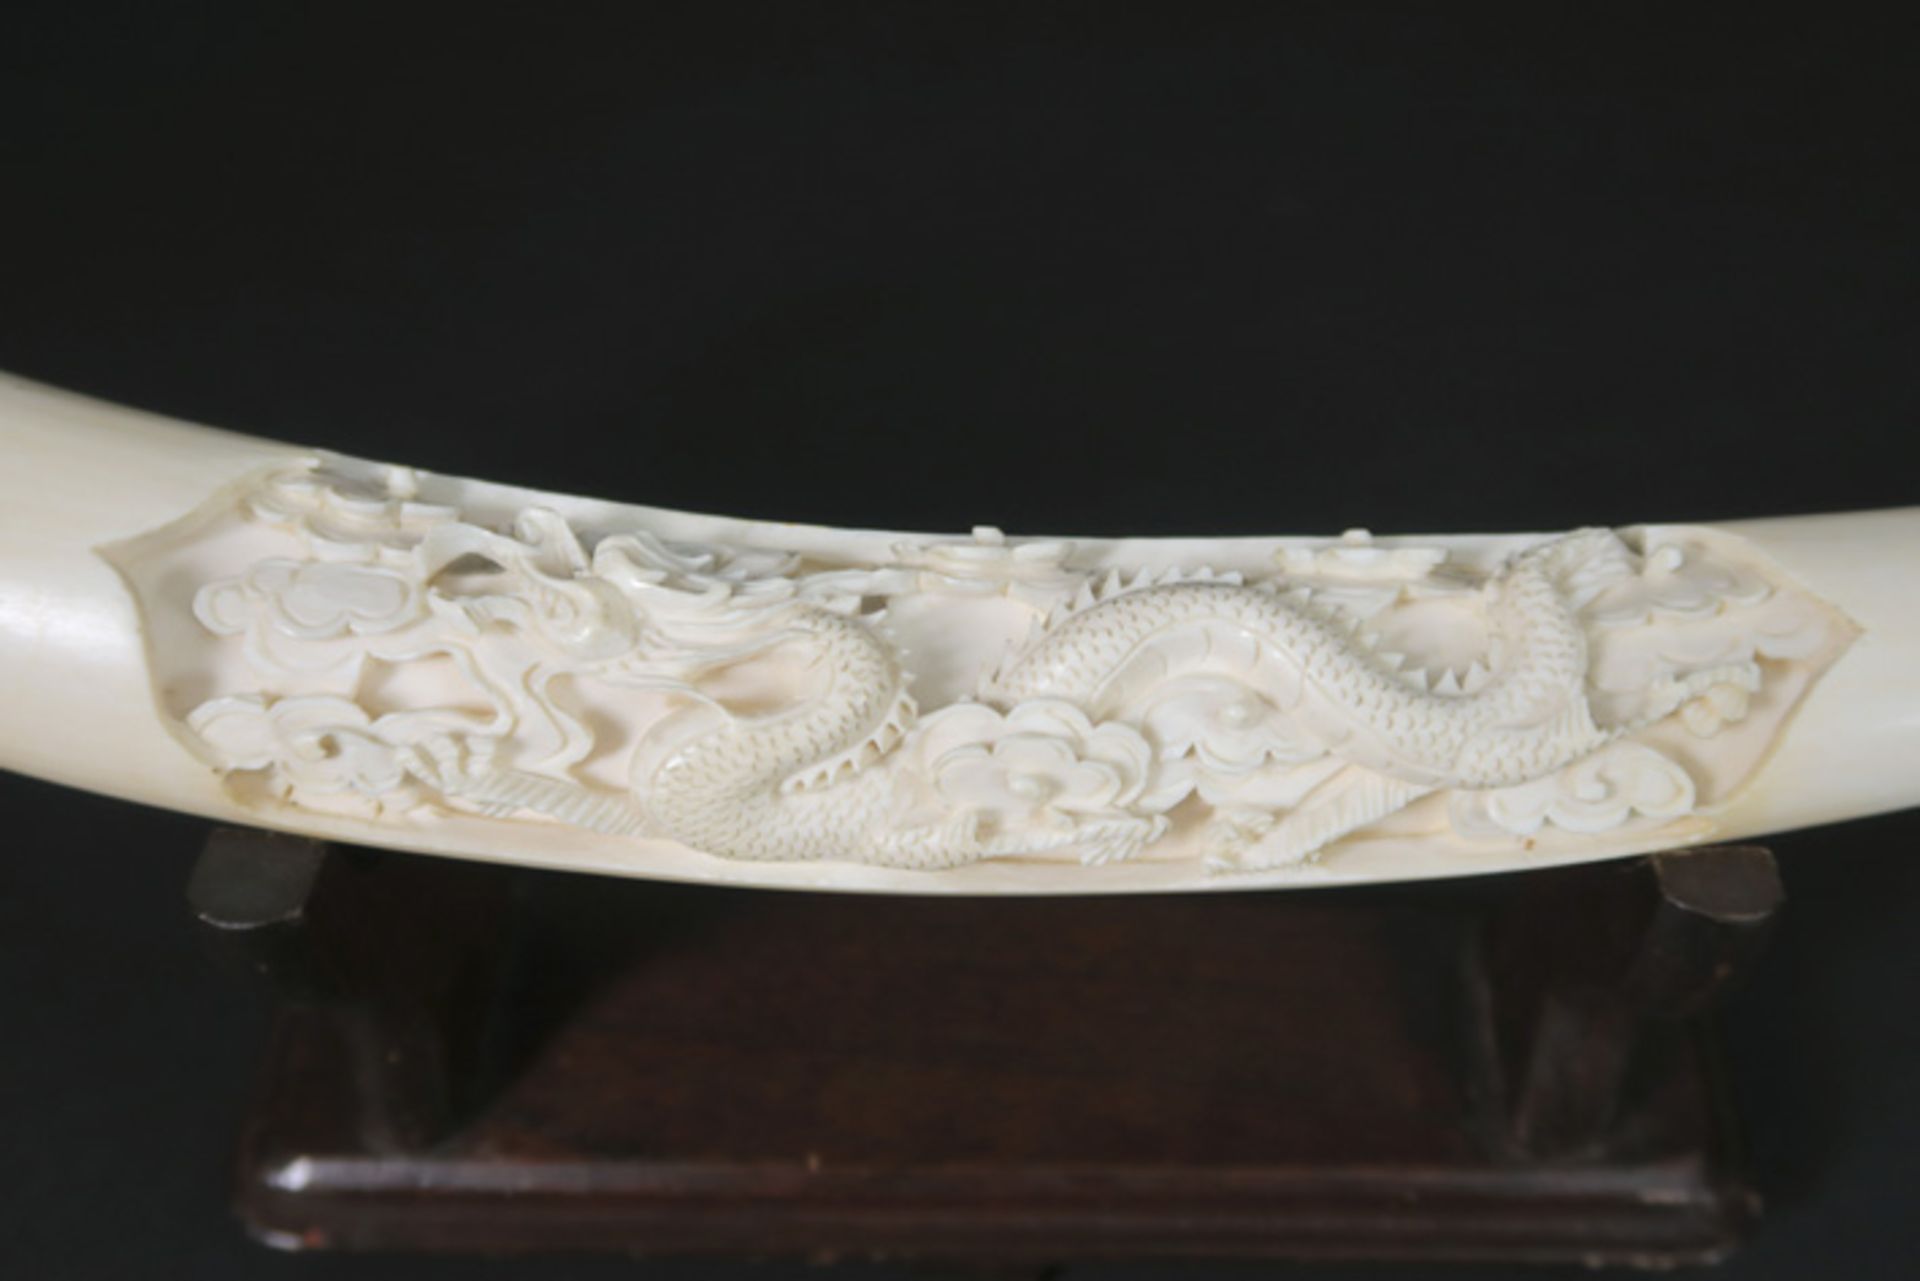 Chinese ivory tusk with a sculpted dragon decor Chinese ivoren "tand" met gesculpteerd drakendecor - - Bild 2 aus 2